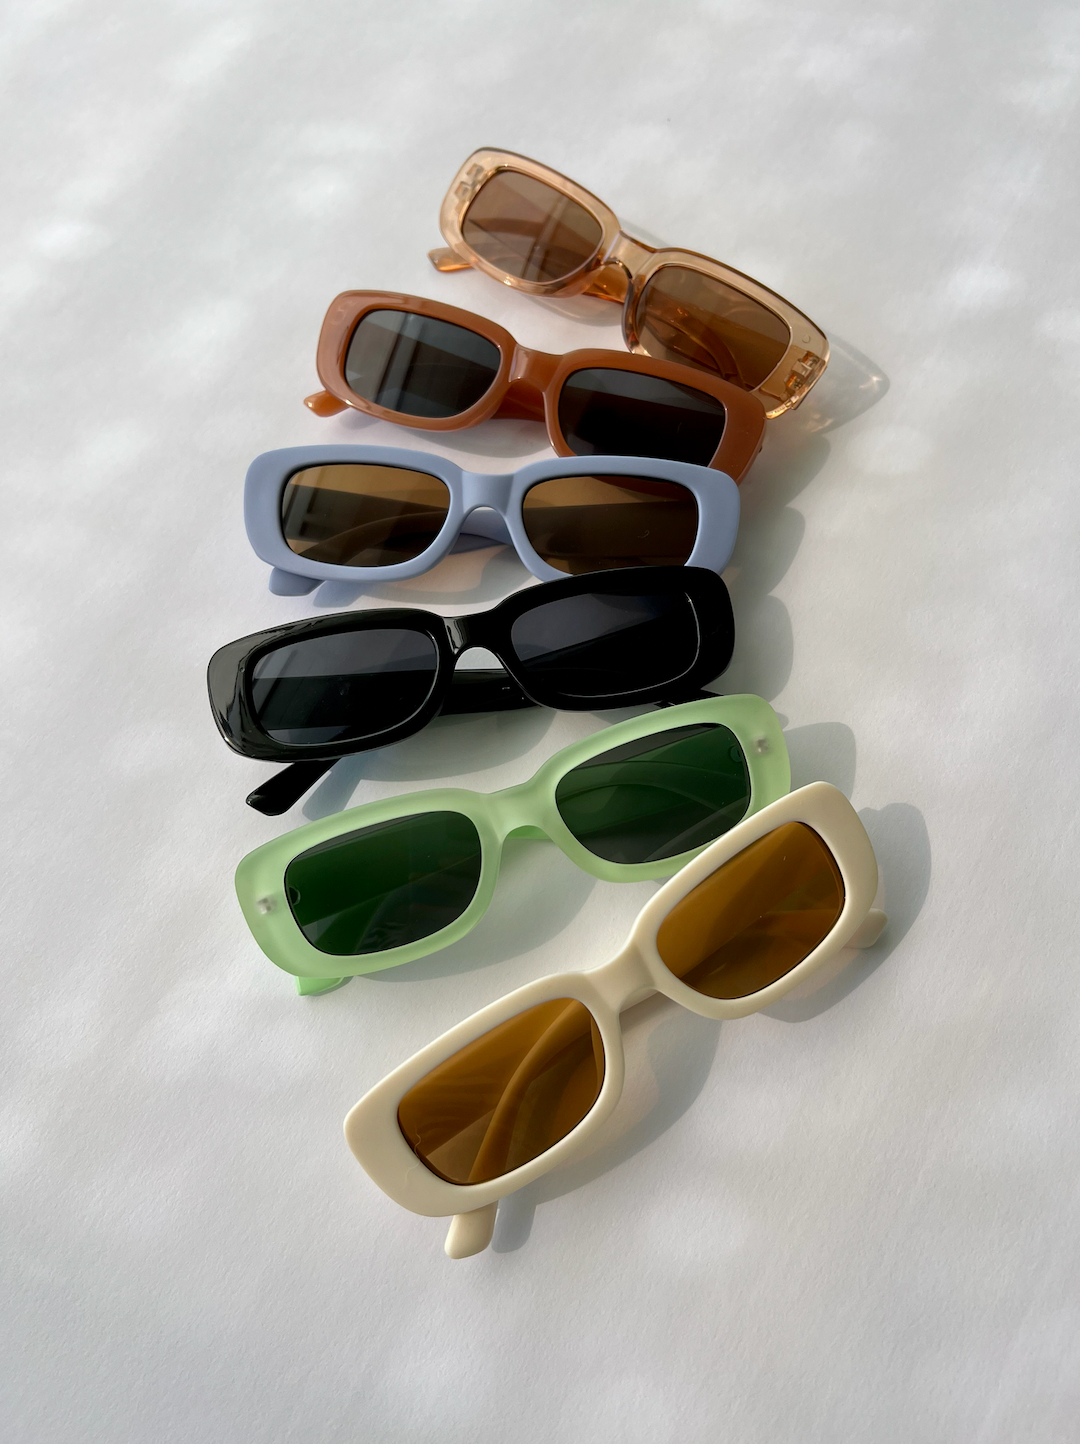 Amber Transparent | An assortment of kids' sunglasses in various colors